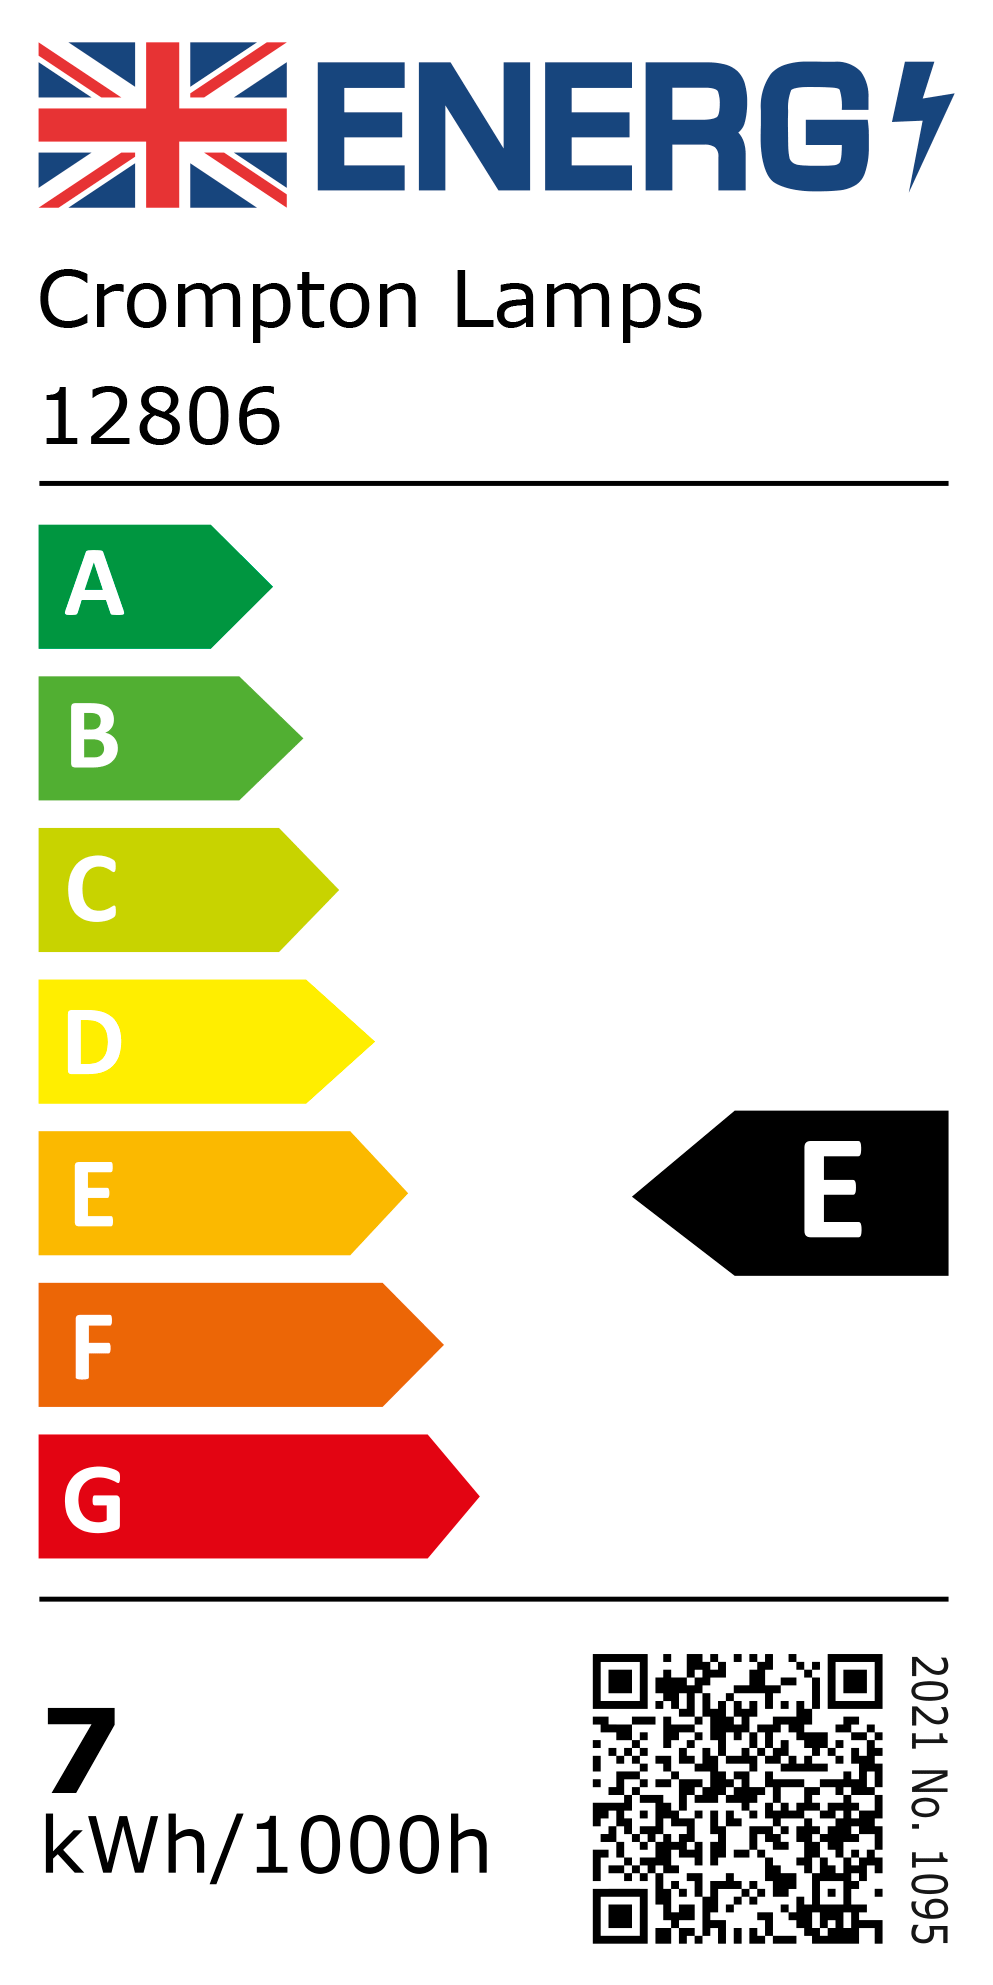 New 2021 Energy Rating Label: MPN 12806